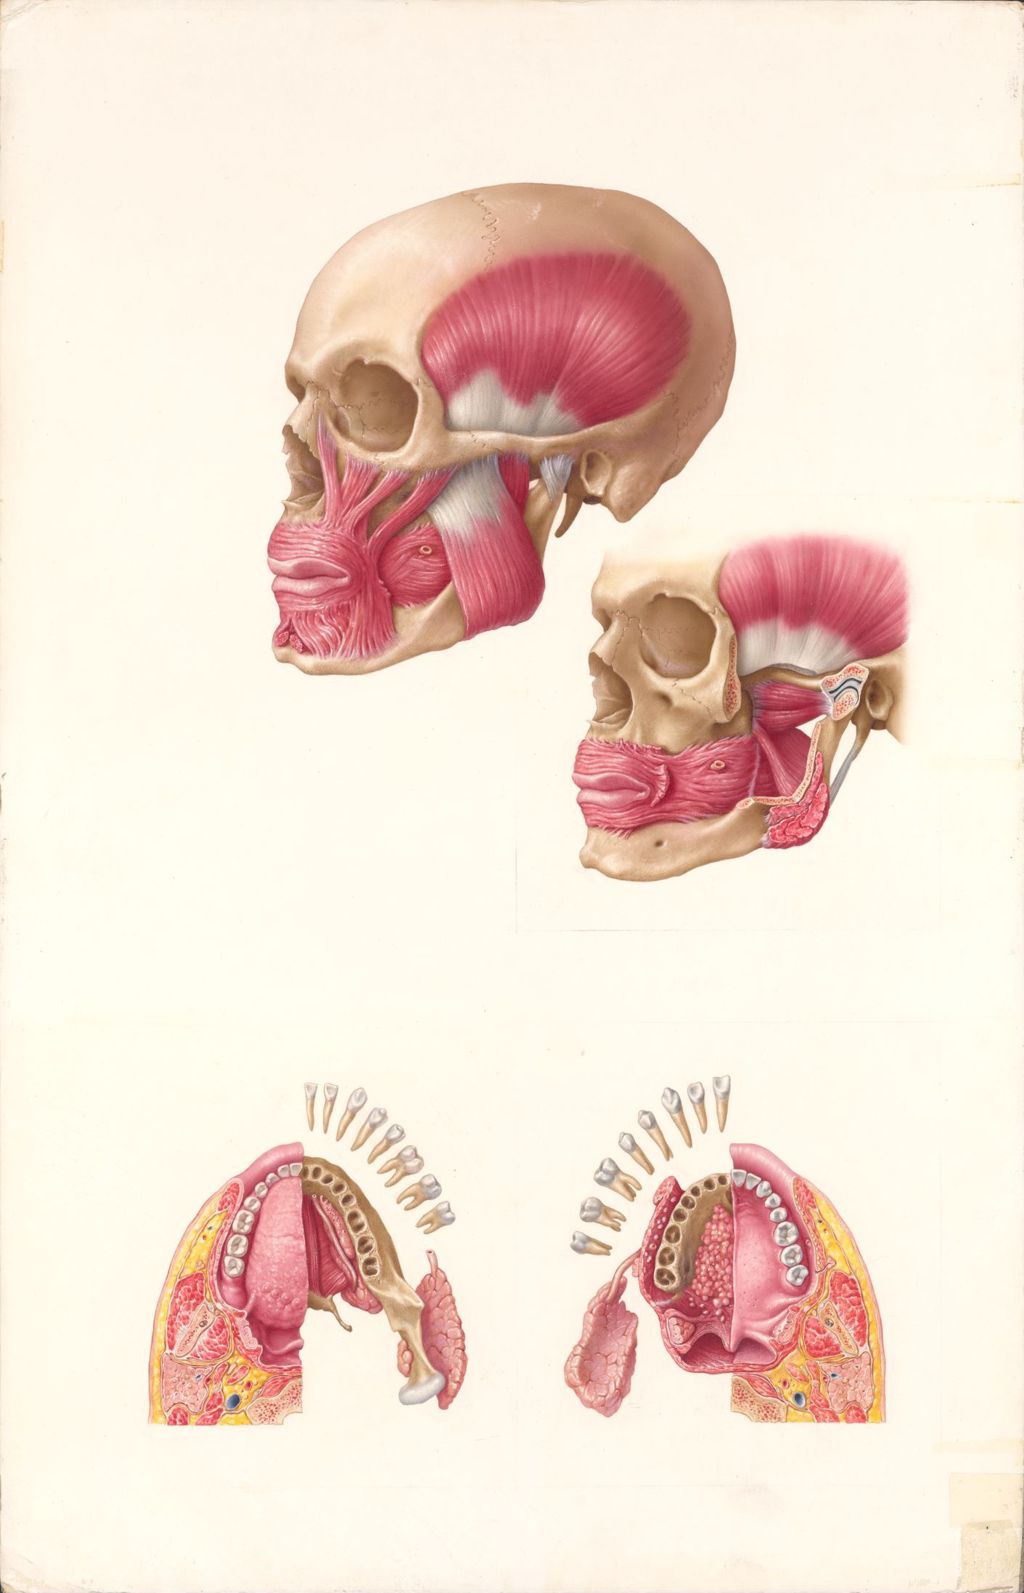 Doctor-Patient Explanatory Atlas of Anatomy, The Normal Anatomy of the Mouth, Plate I, Muscles of the lips and mastication